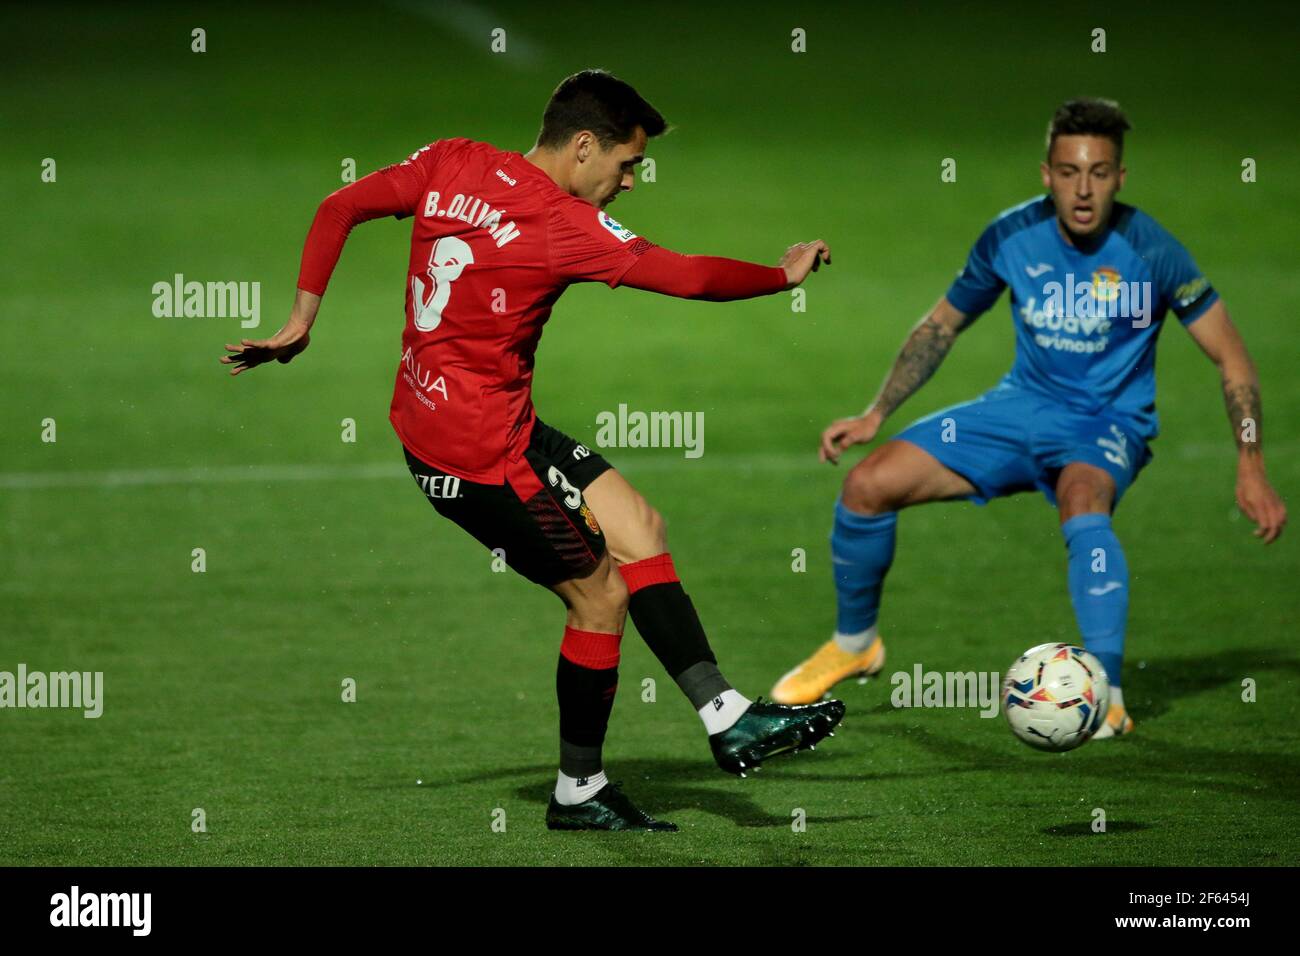 Fuenlabrada, Madrid, Spain, 29.03.2021C. F. Fuenlabrada against R. C. D. Mallorca match of the second division of Spanish soccer in match 31. Mallorca player Brian Olivan (L) Final score 4-1 winner Fuenlabrada with goals from the players Oscar Pichi 13 y 38  Nteka 41  and Pathe Ciss 73  Mallorca scores his player Mboula 56  Photo: Juan Carlos Rojas/Picture Alliance | usage worldwide Stock Photo